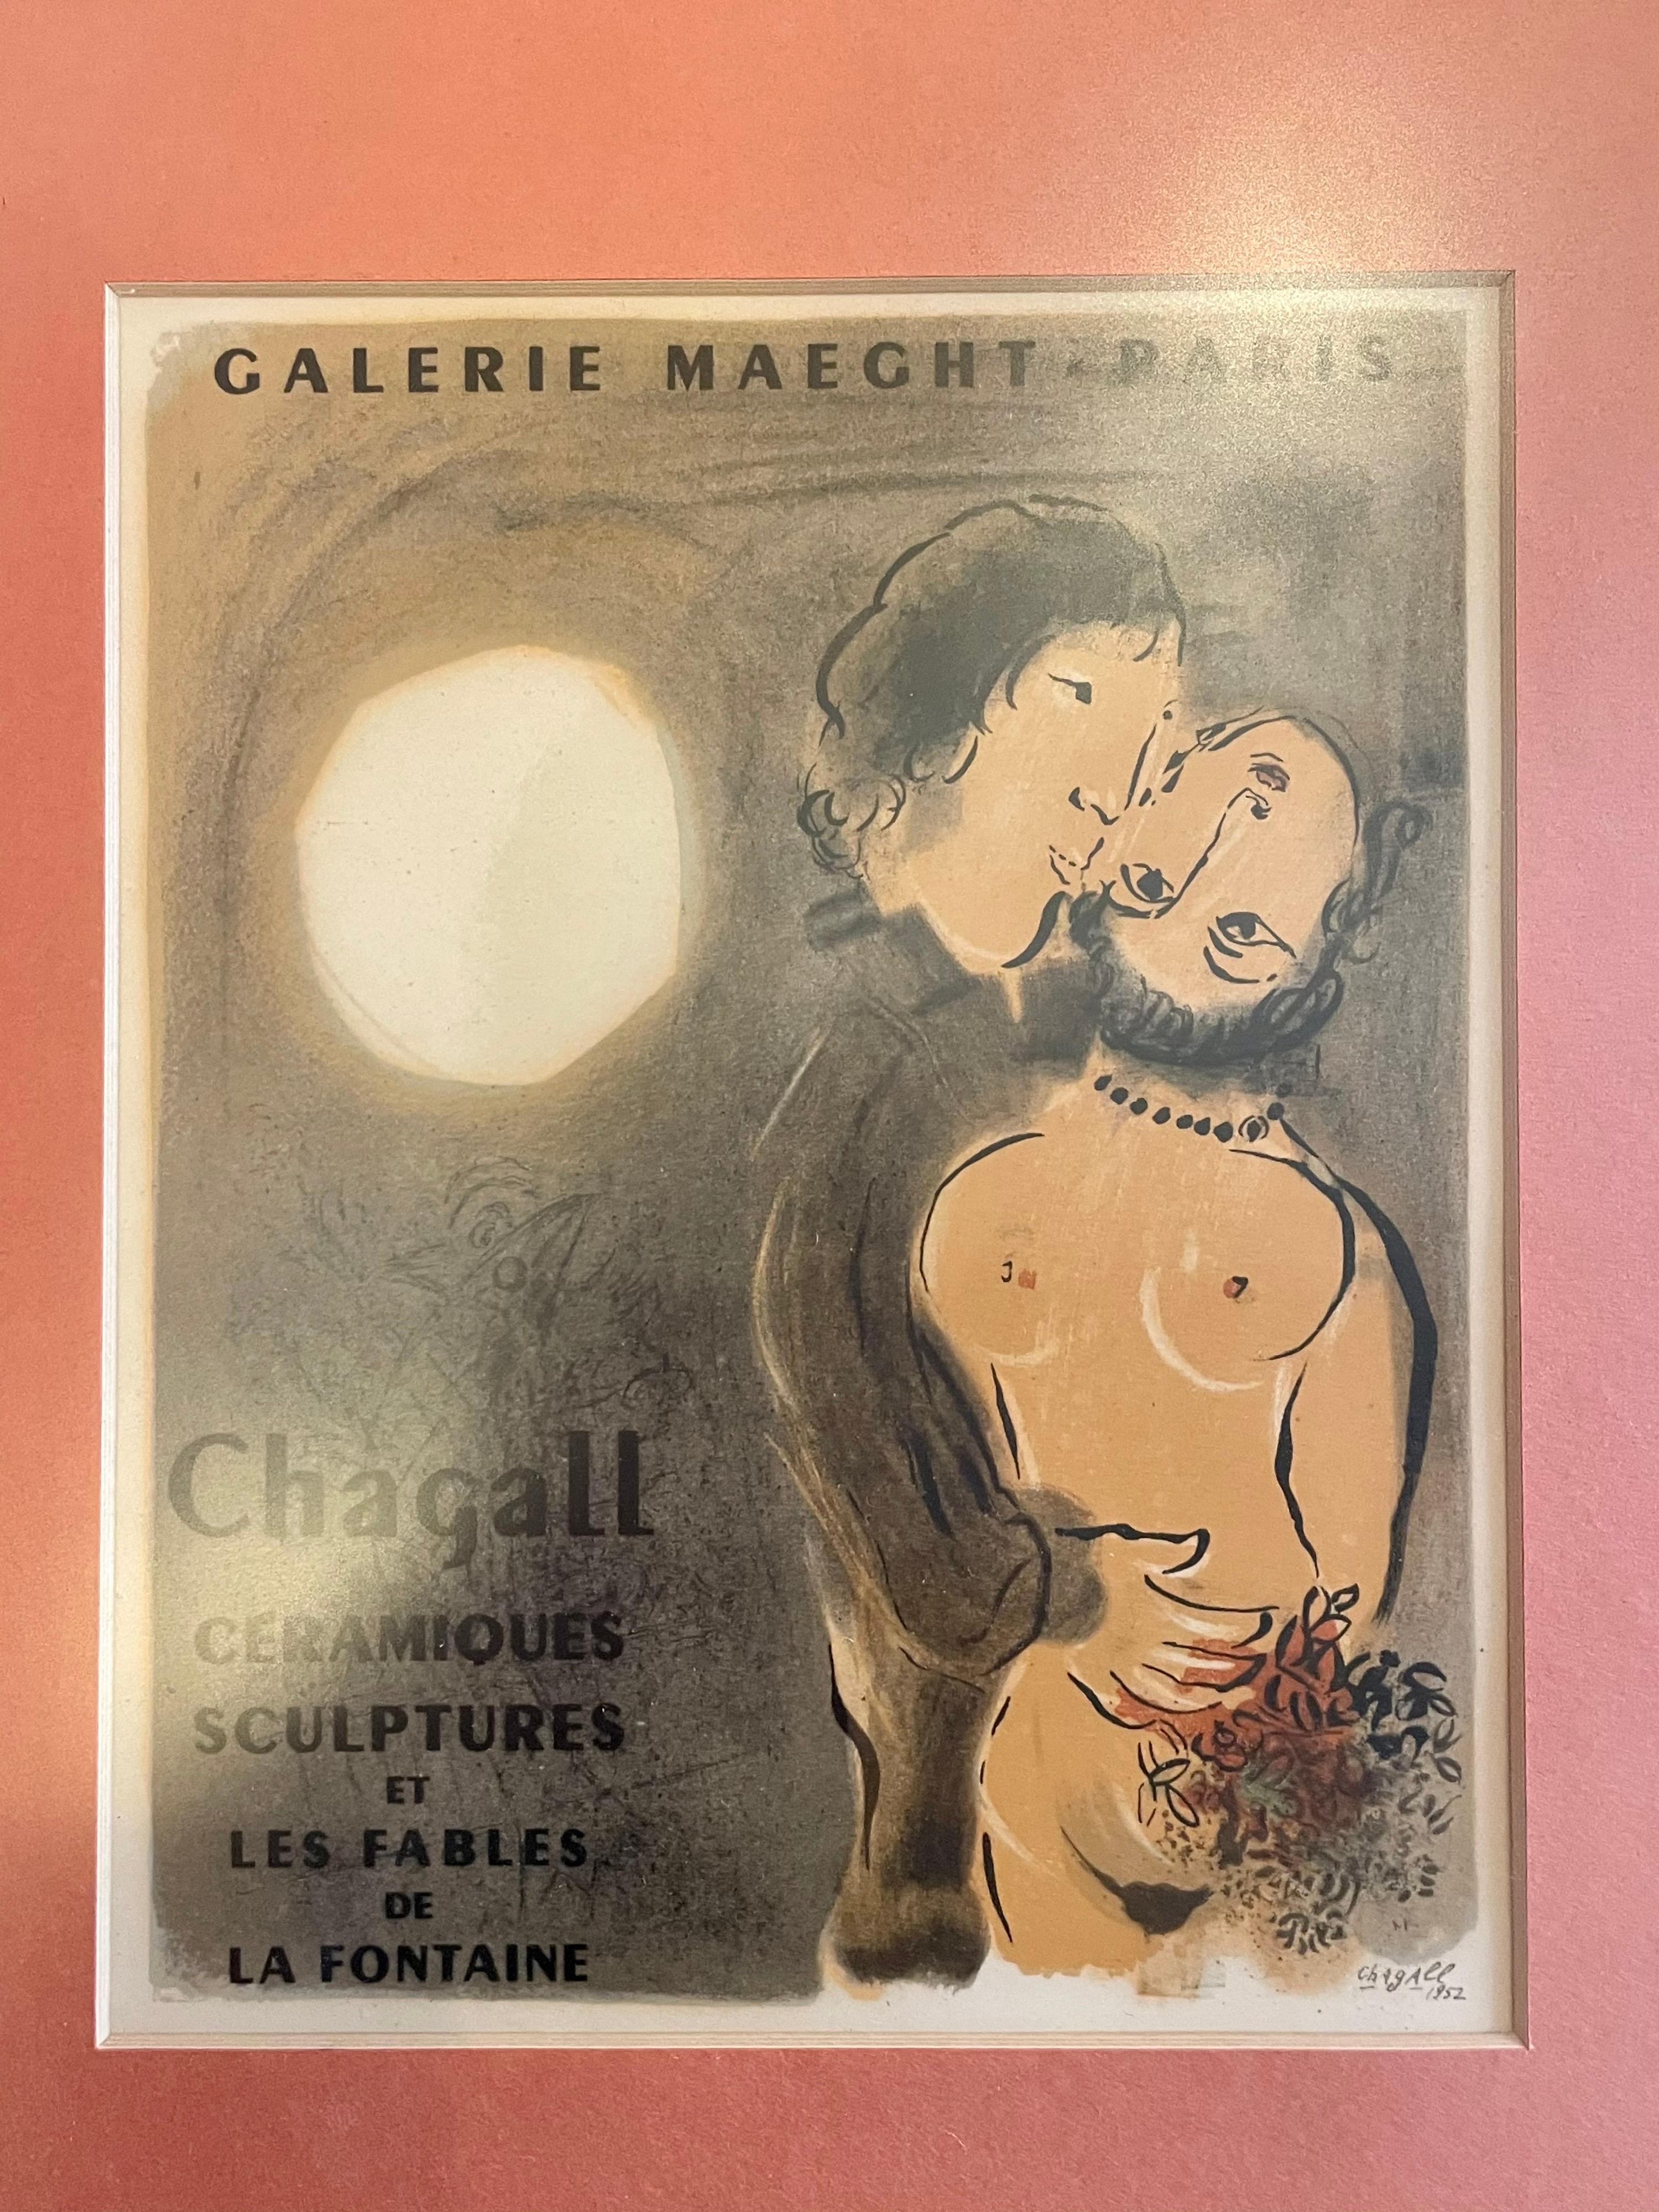 Highly collectible midcentury Marc Chagall Galerie Maeght, Paris lithograph exhibition poster, circa 1952s. The piece is from the French Posters collection and is in very nice original frame.


Posters as an art form were invented by Jules Chéret